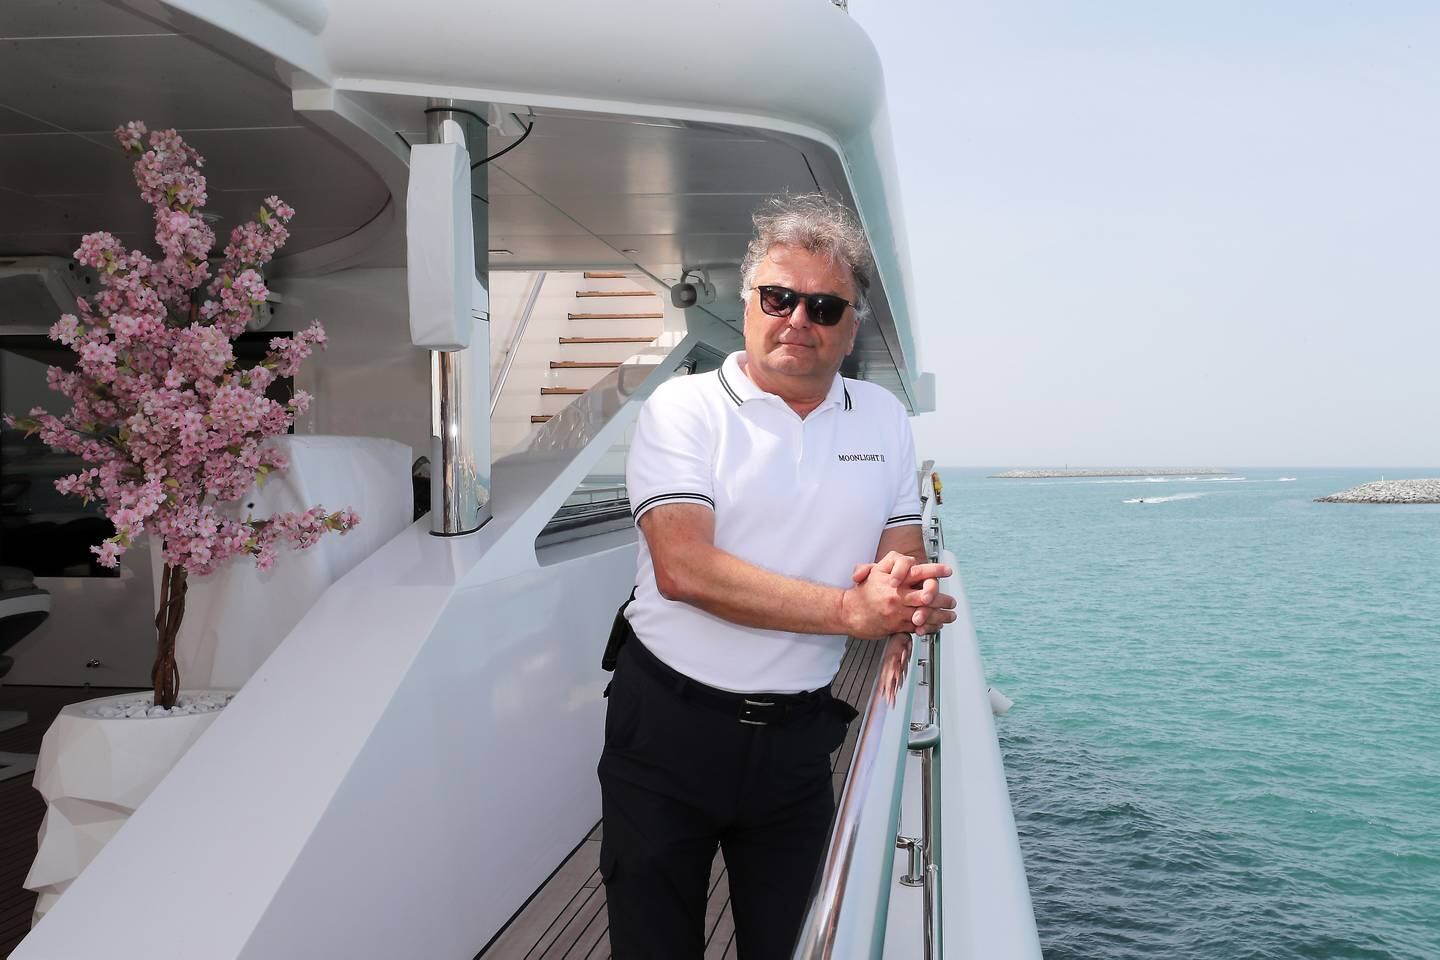 Arni Brzac, captain of the 'Moonlight ll' yacht. Pawan Singh / The National   